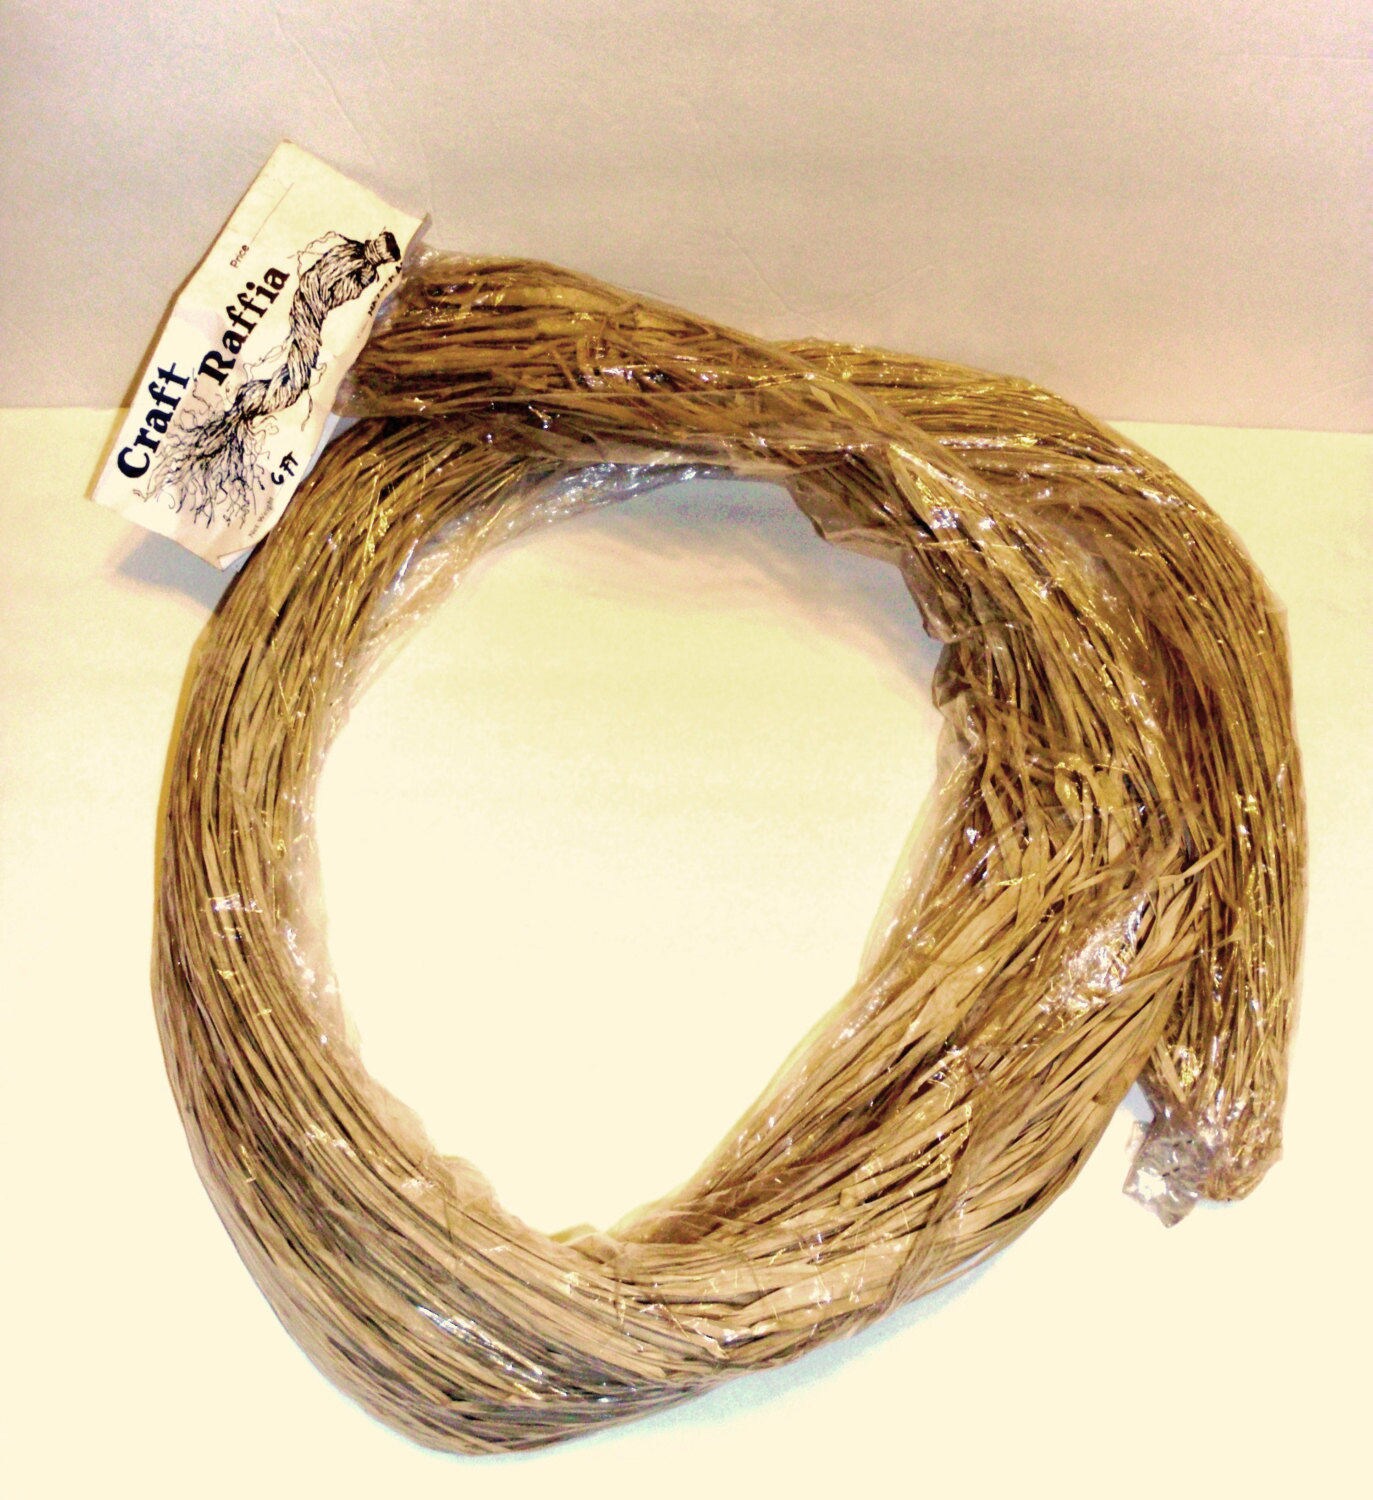 Raffia, Mats, and Hunting Grass for Crafters, Florists, and